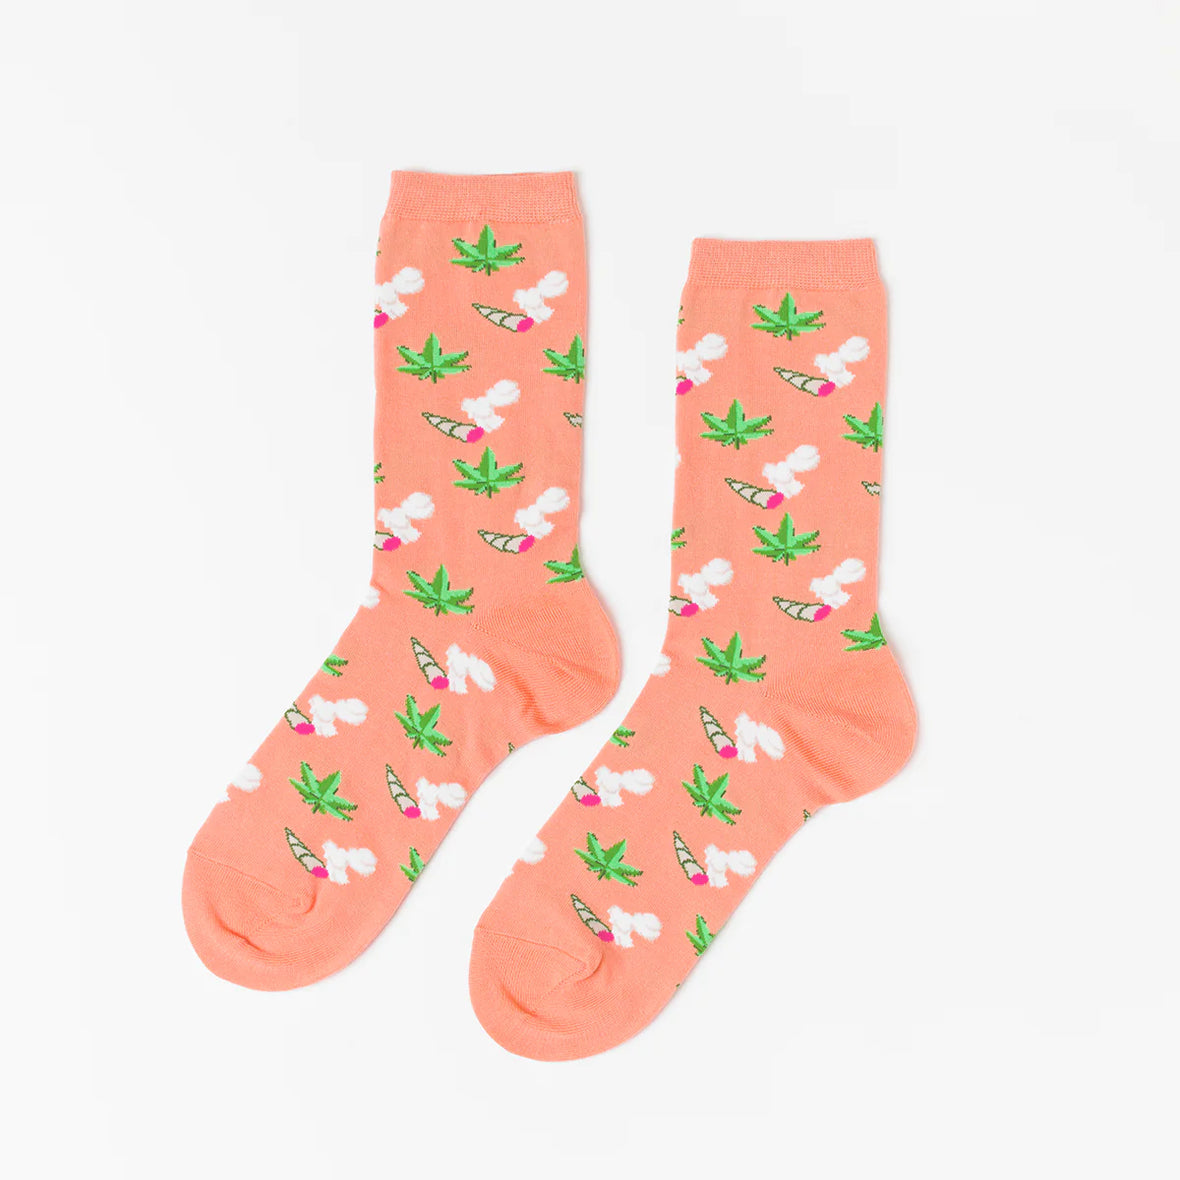 Joint and Leaf Socks